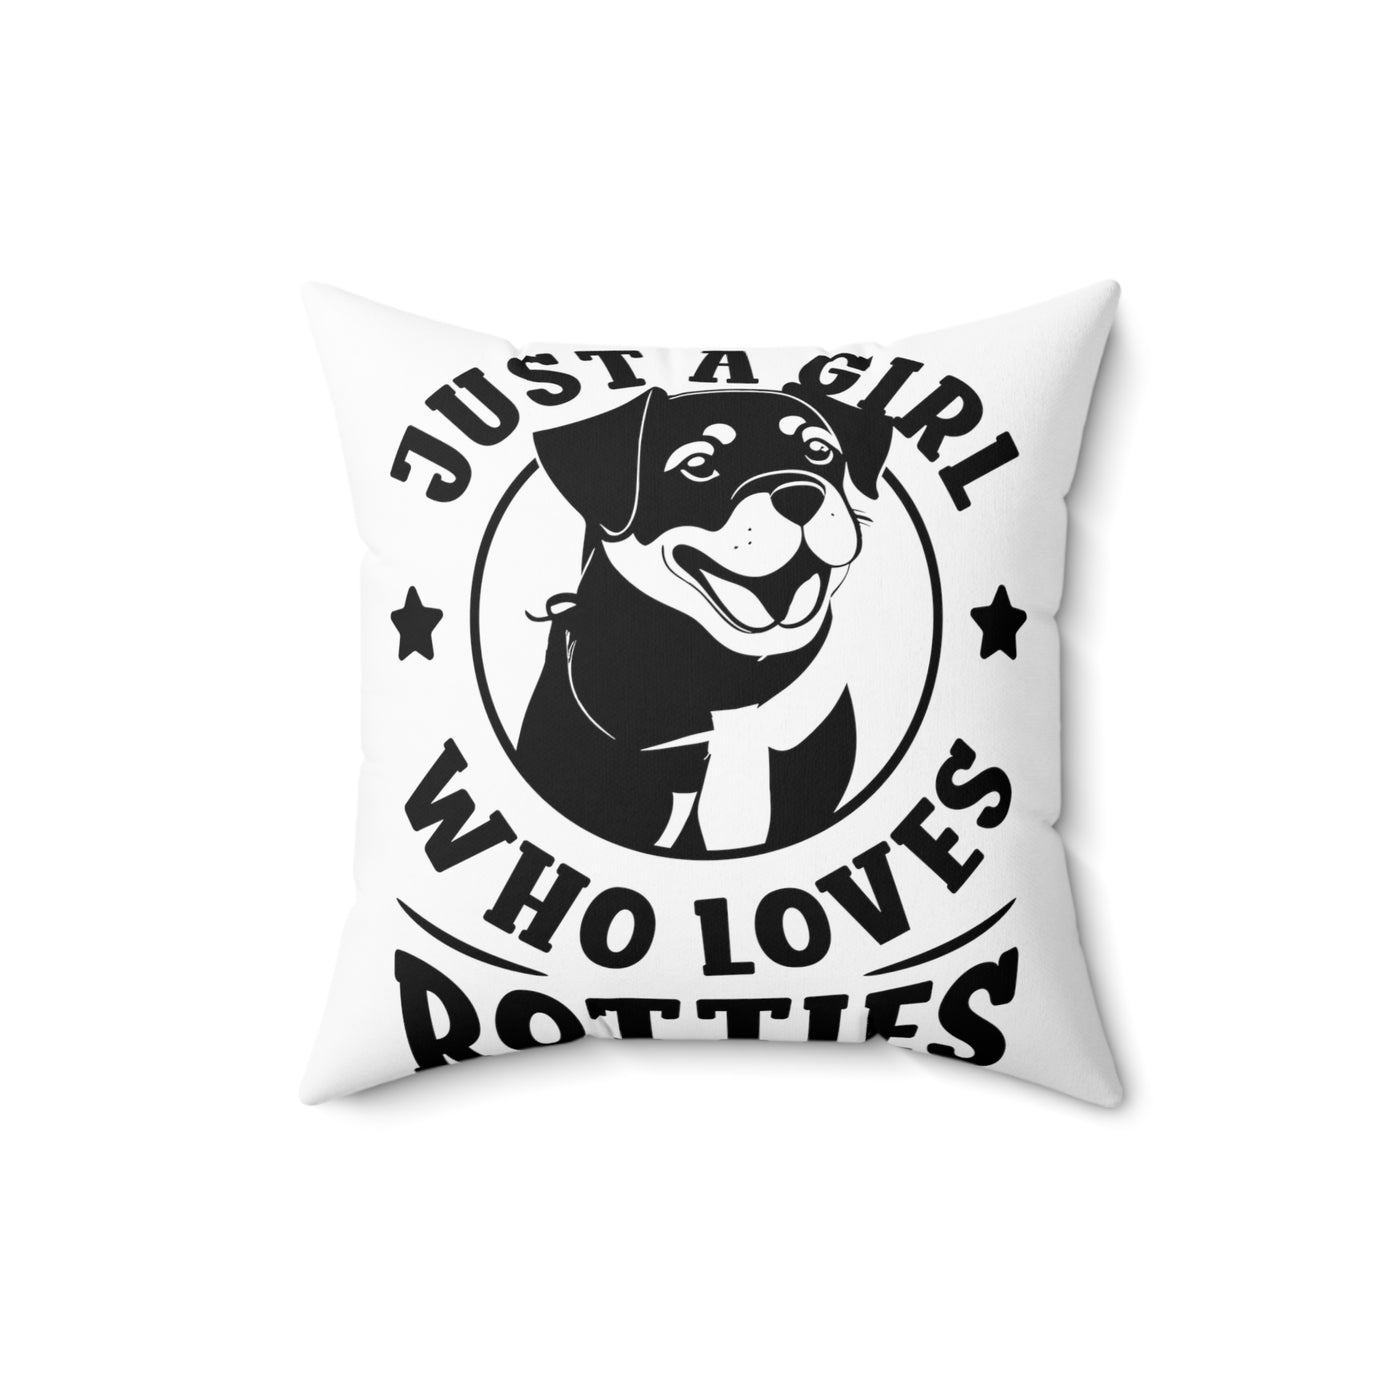 Just A Girl Who Loves Rotties Square Pillow